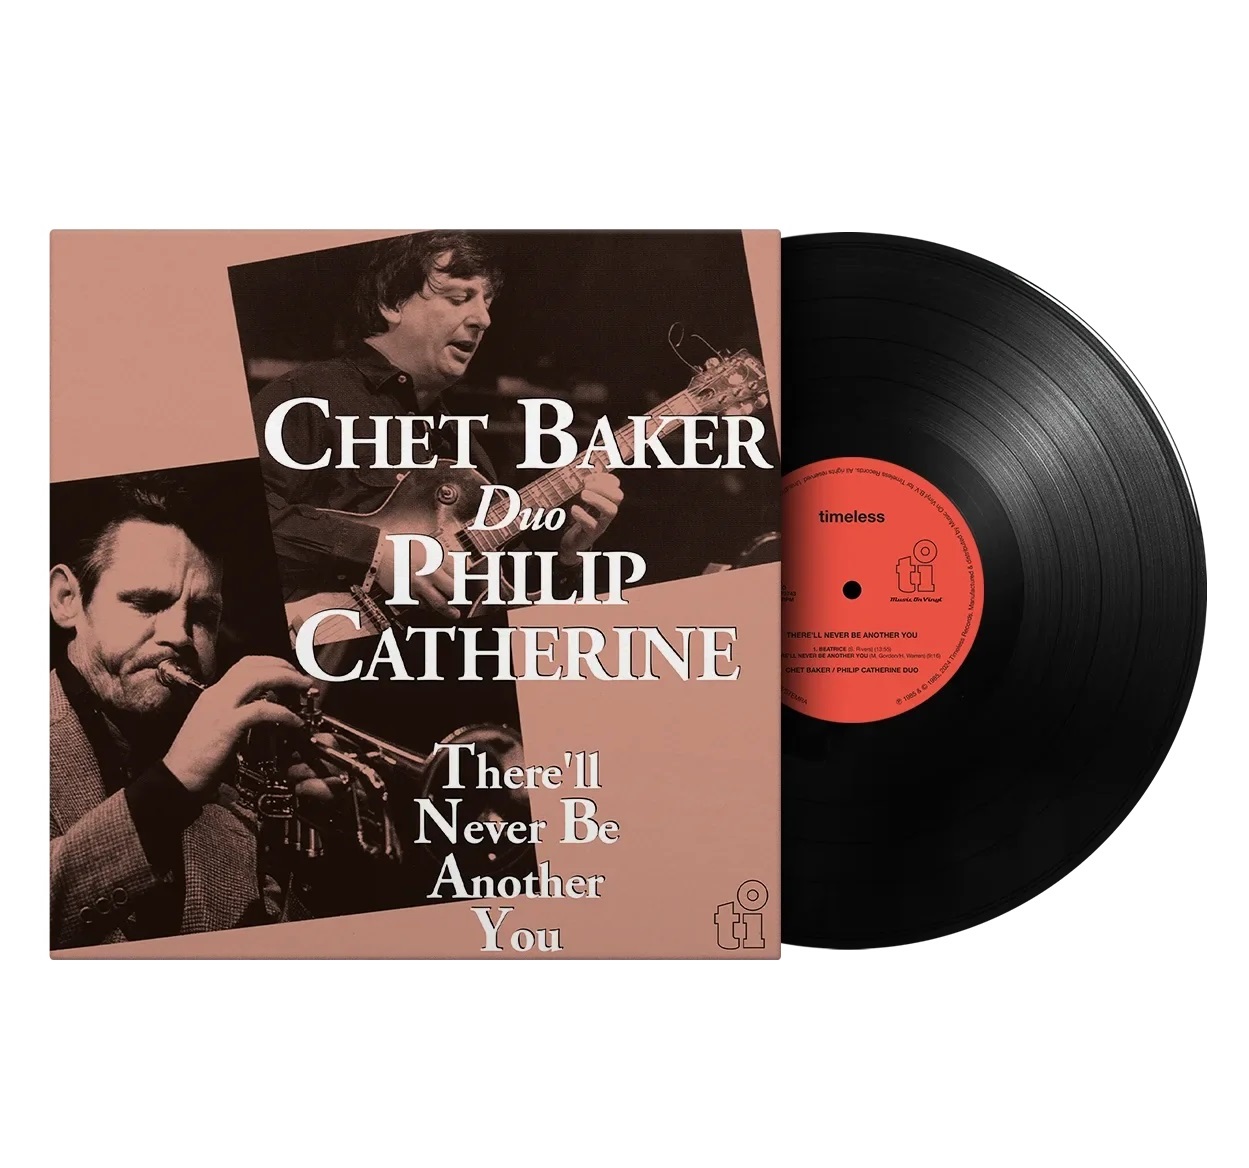 Chet Baker & Philip Catherine (쳇 베이커 & 필립 캐서린) - There'll Never Be Another You [LP]